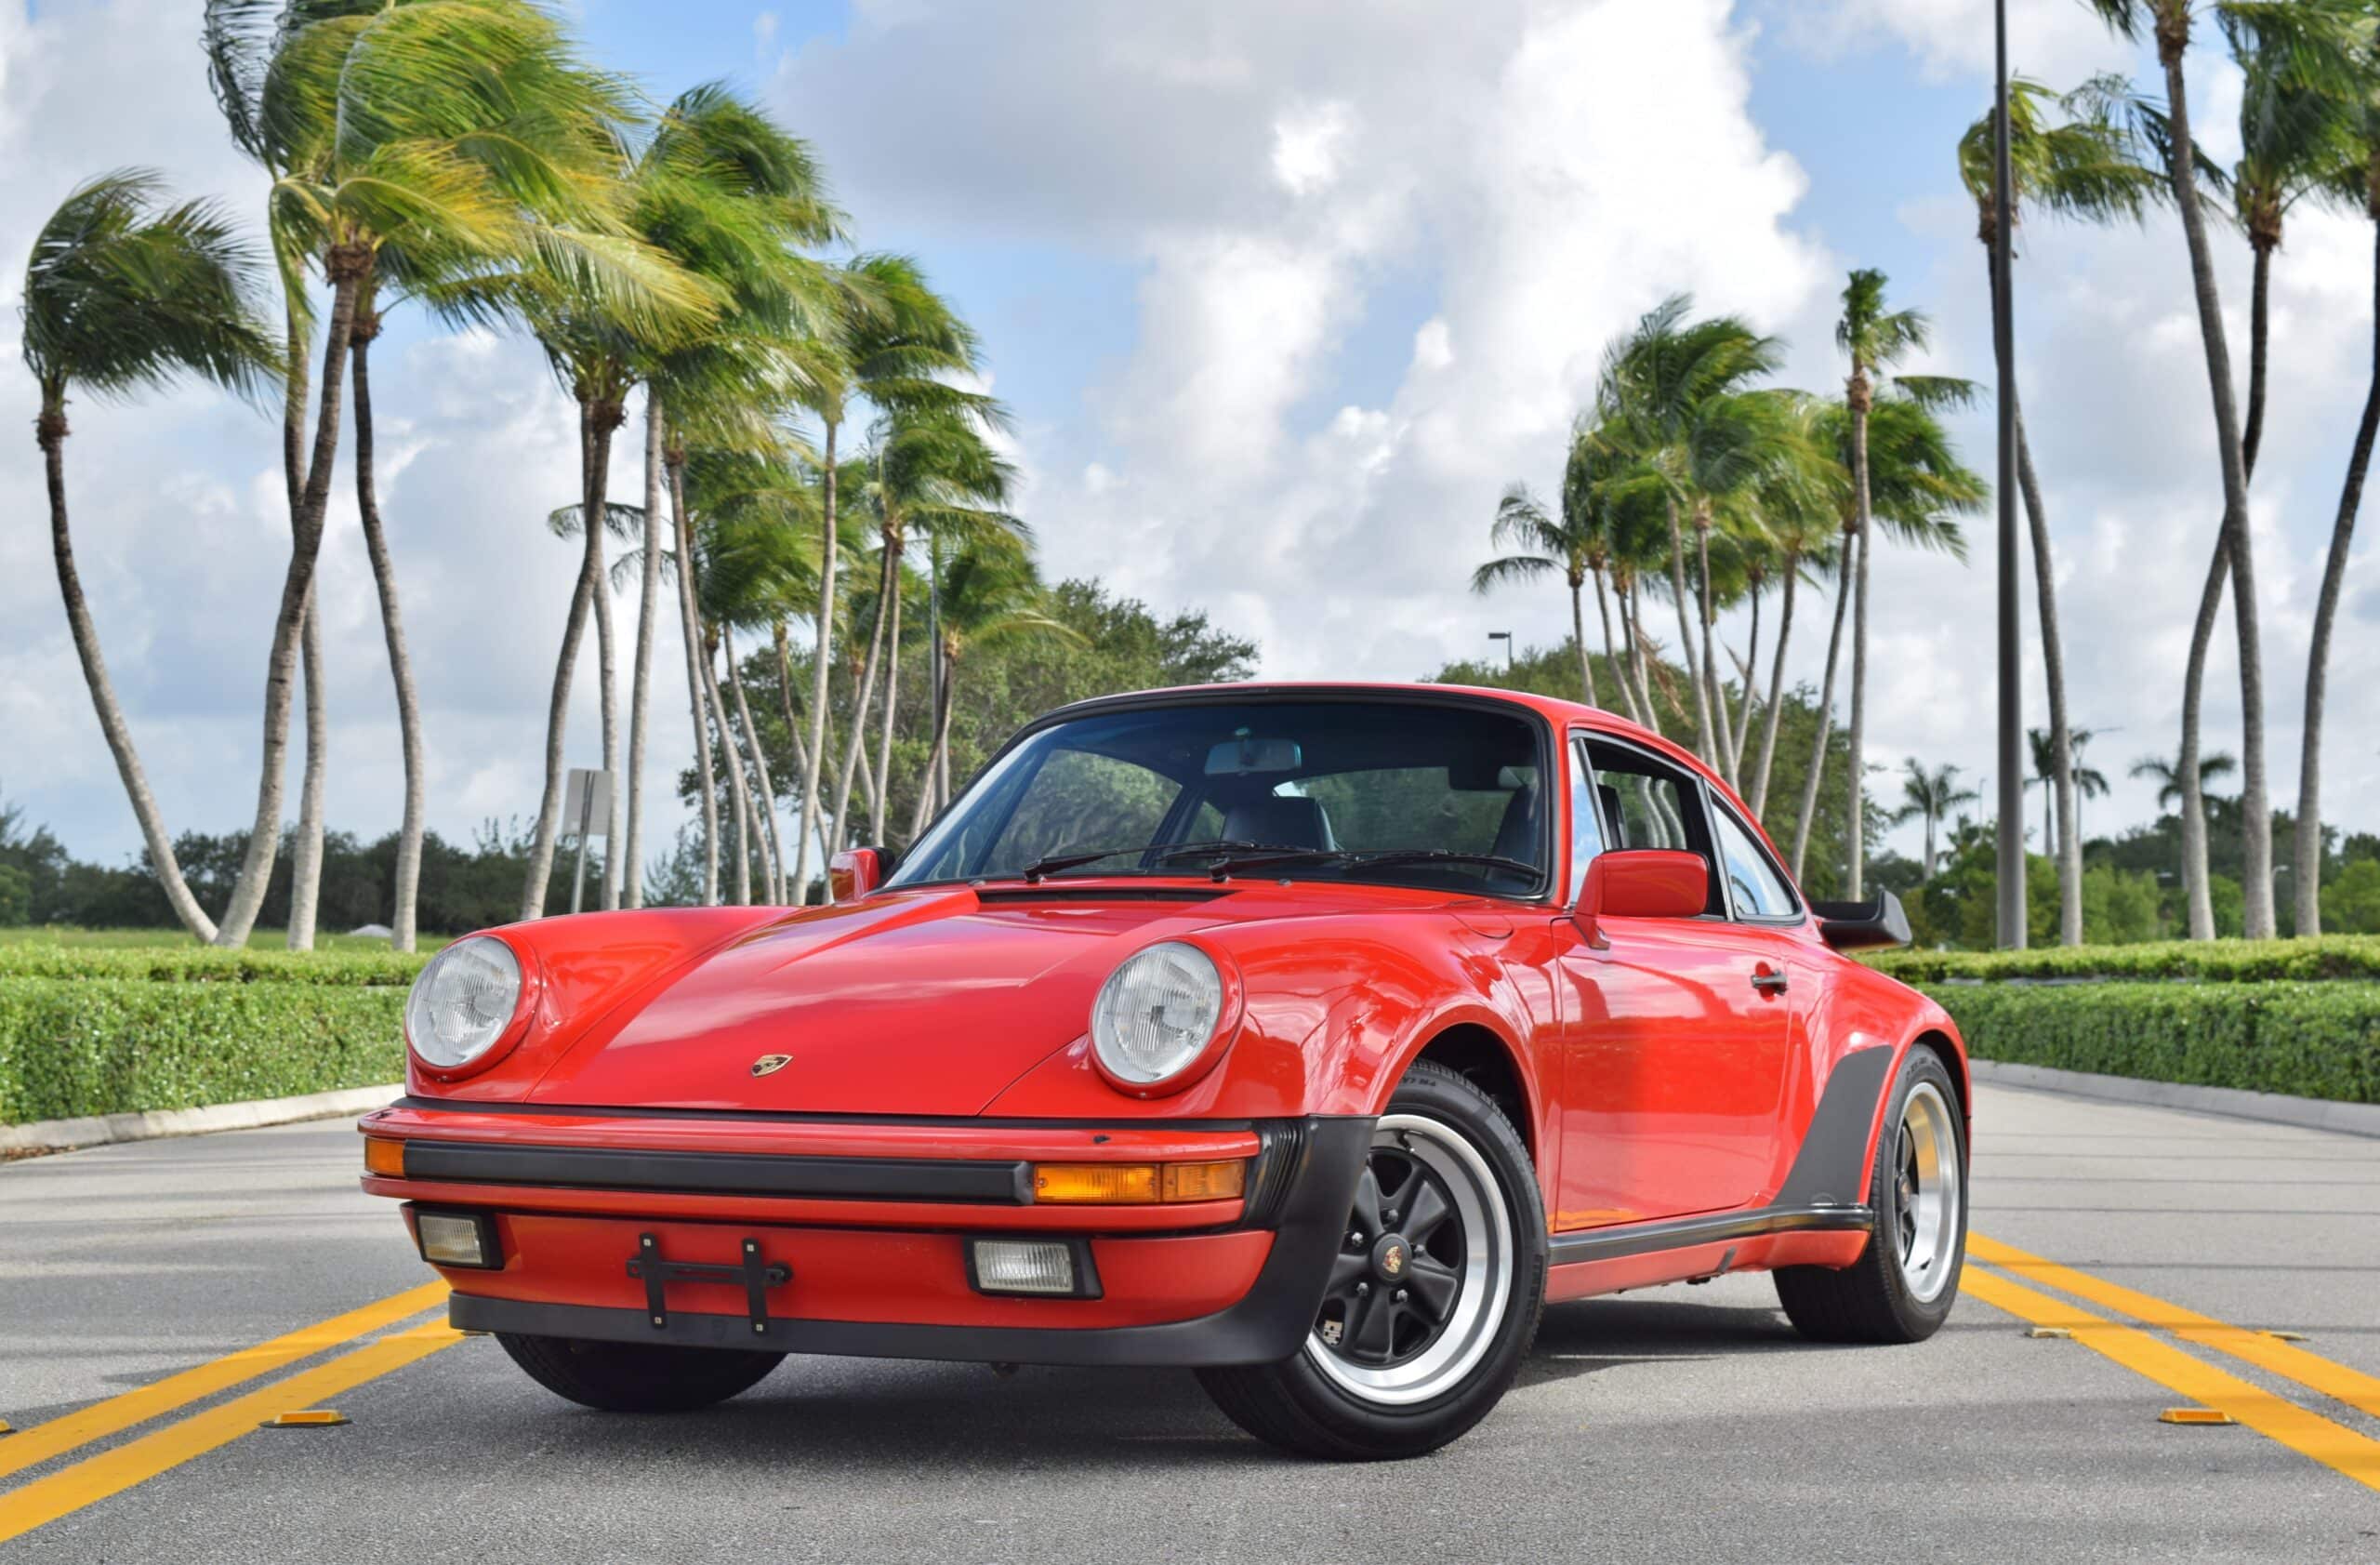 1986 Porsche 911 Turbo 930 Only 51K Miles-Matching Numbers-100% Stock-Engine reseal Porsche Service History